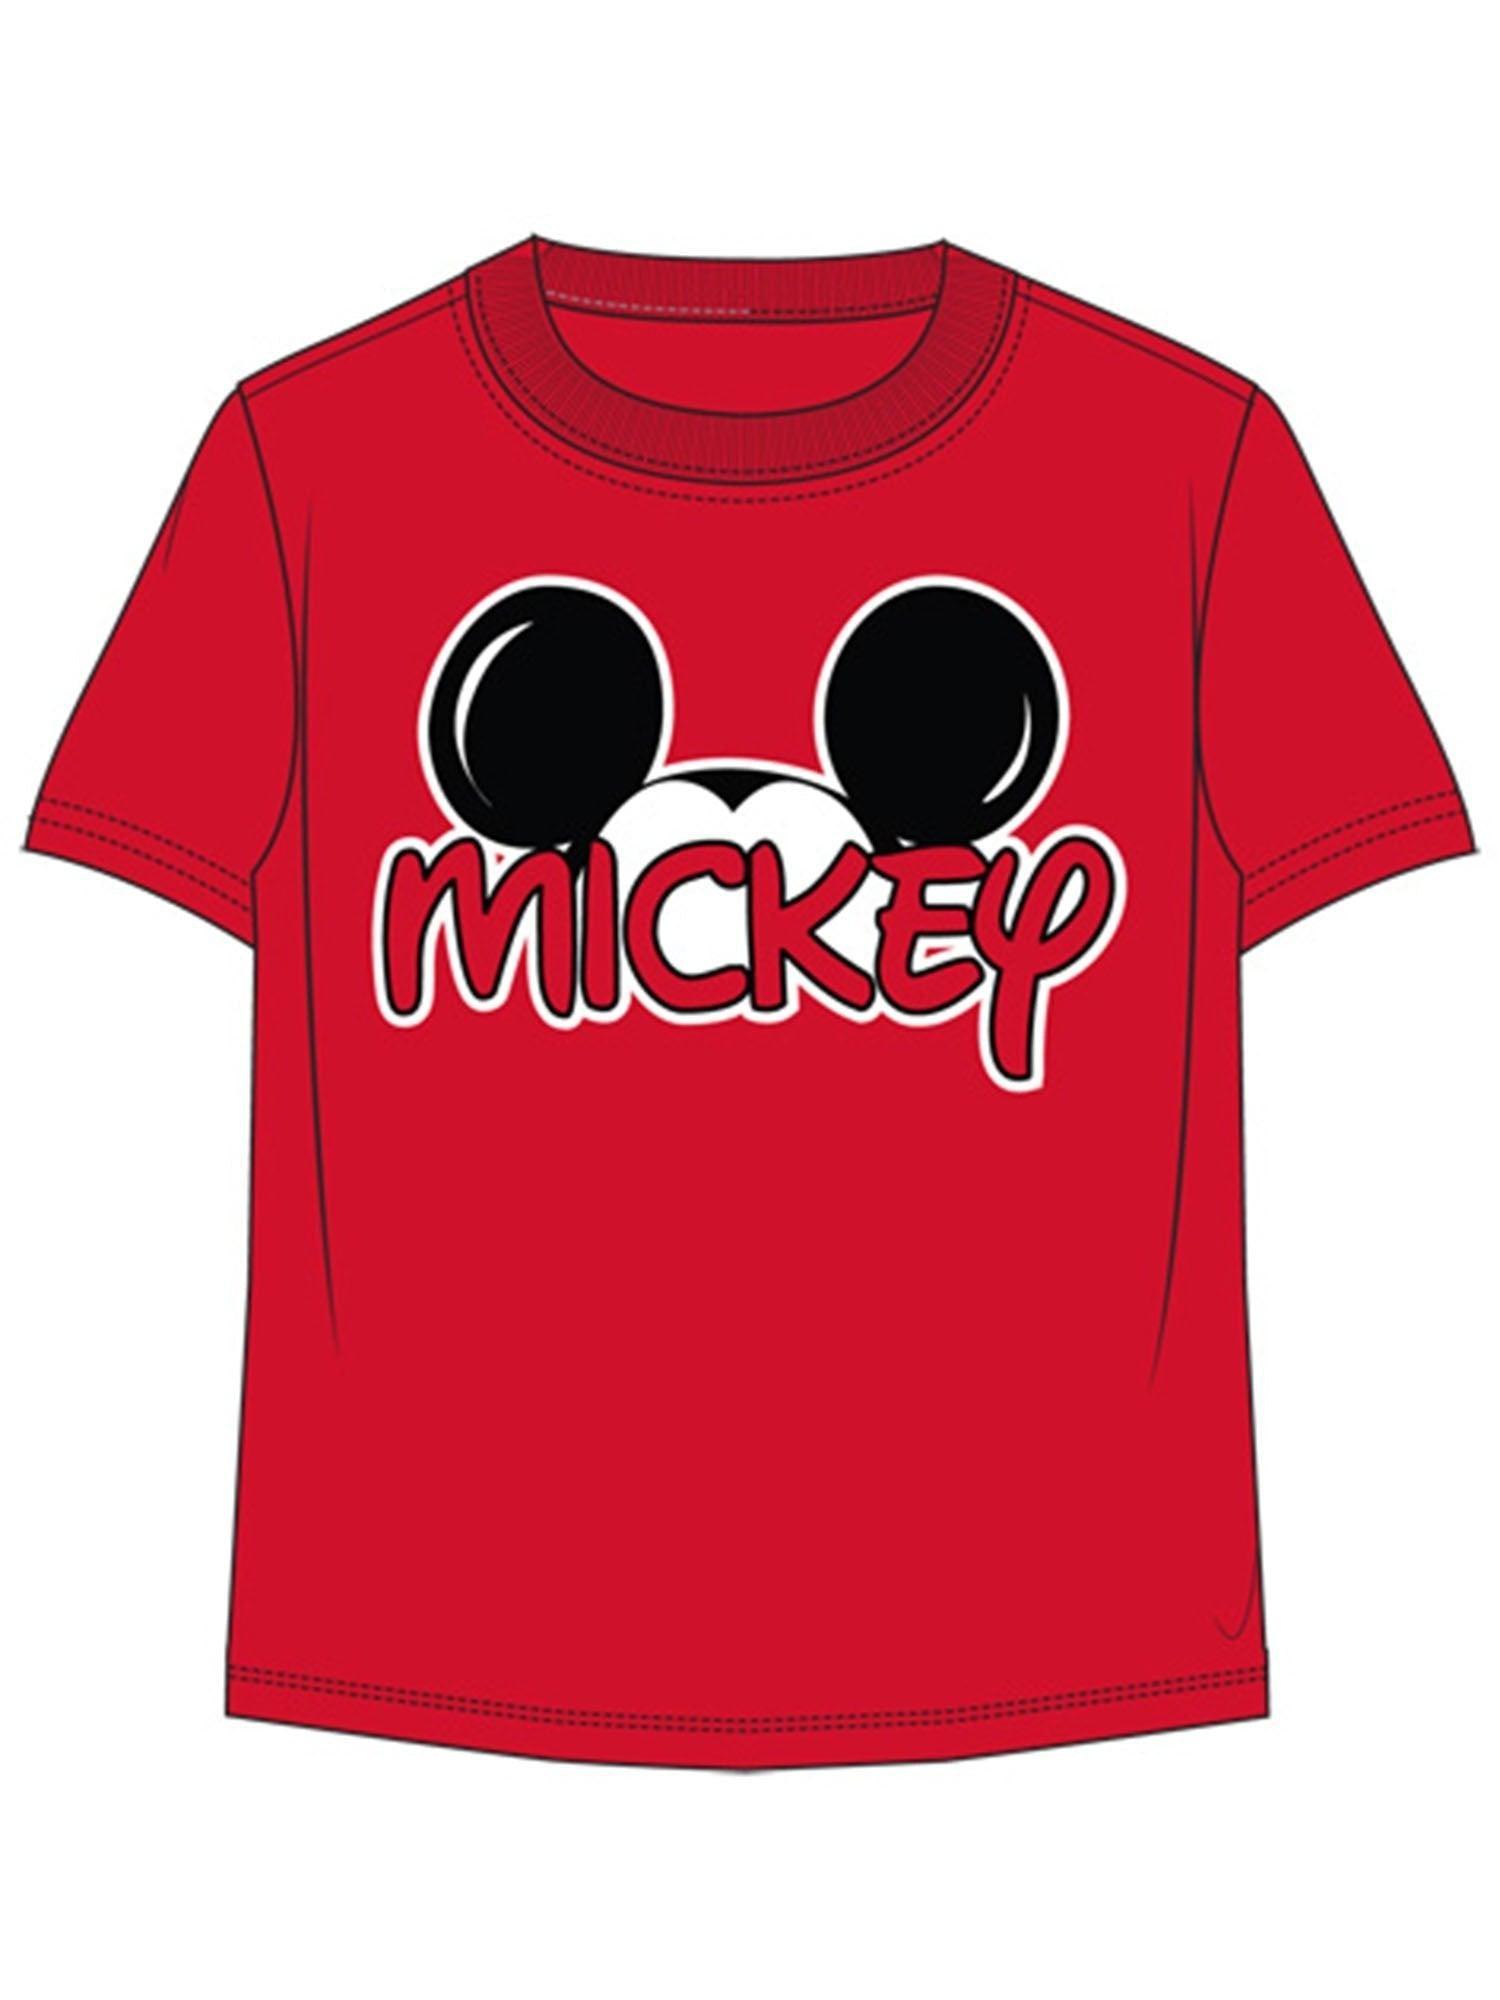 Disney Matching Family Collection Mickey Mouse Toddler Tee